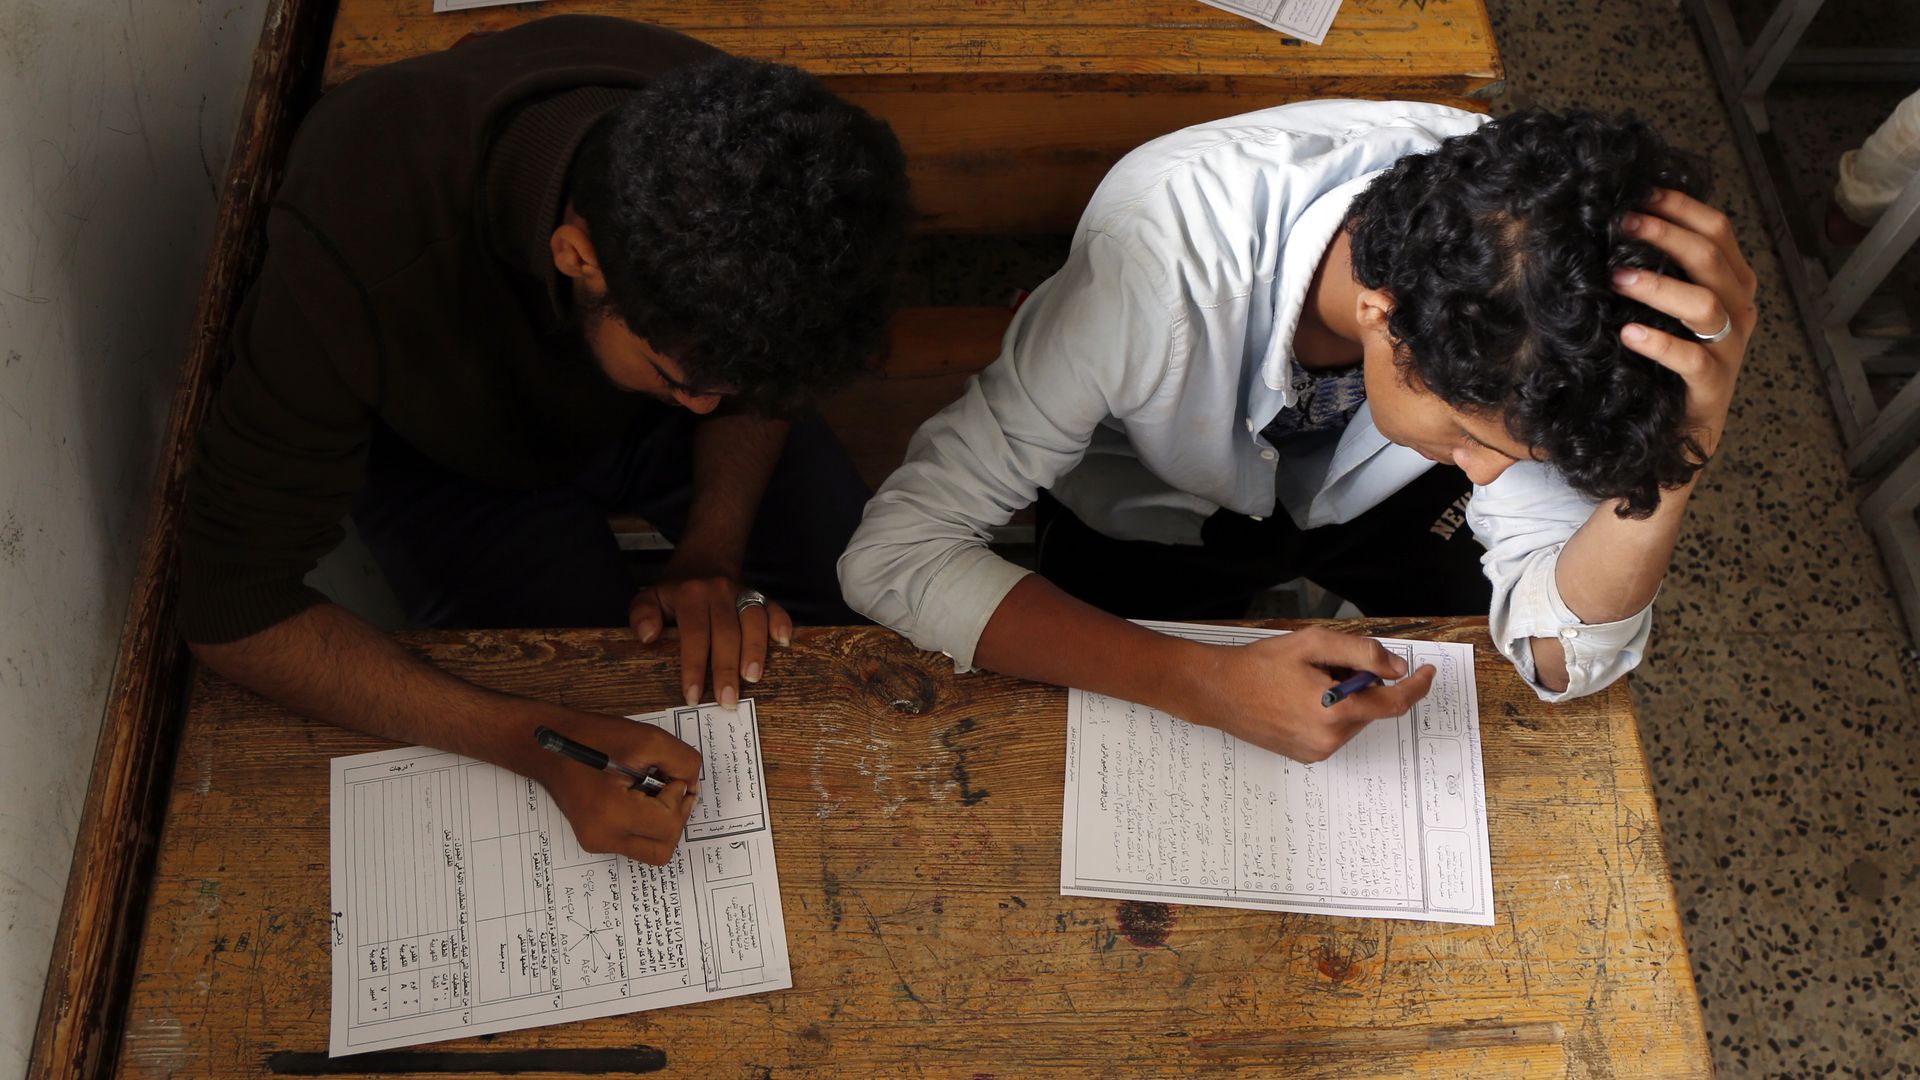 In this image, two male students sit at a desk while taking a test on separate sheets of paper.